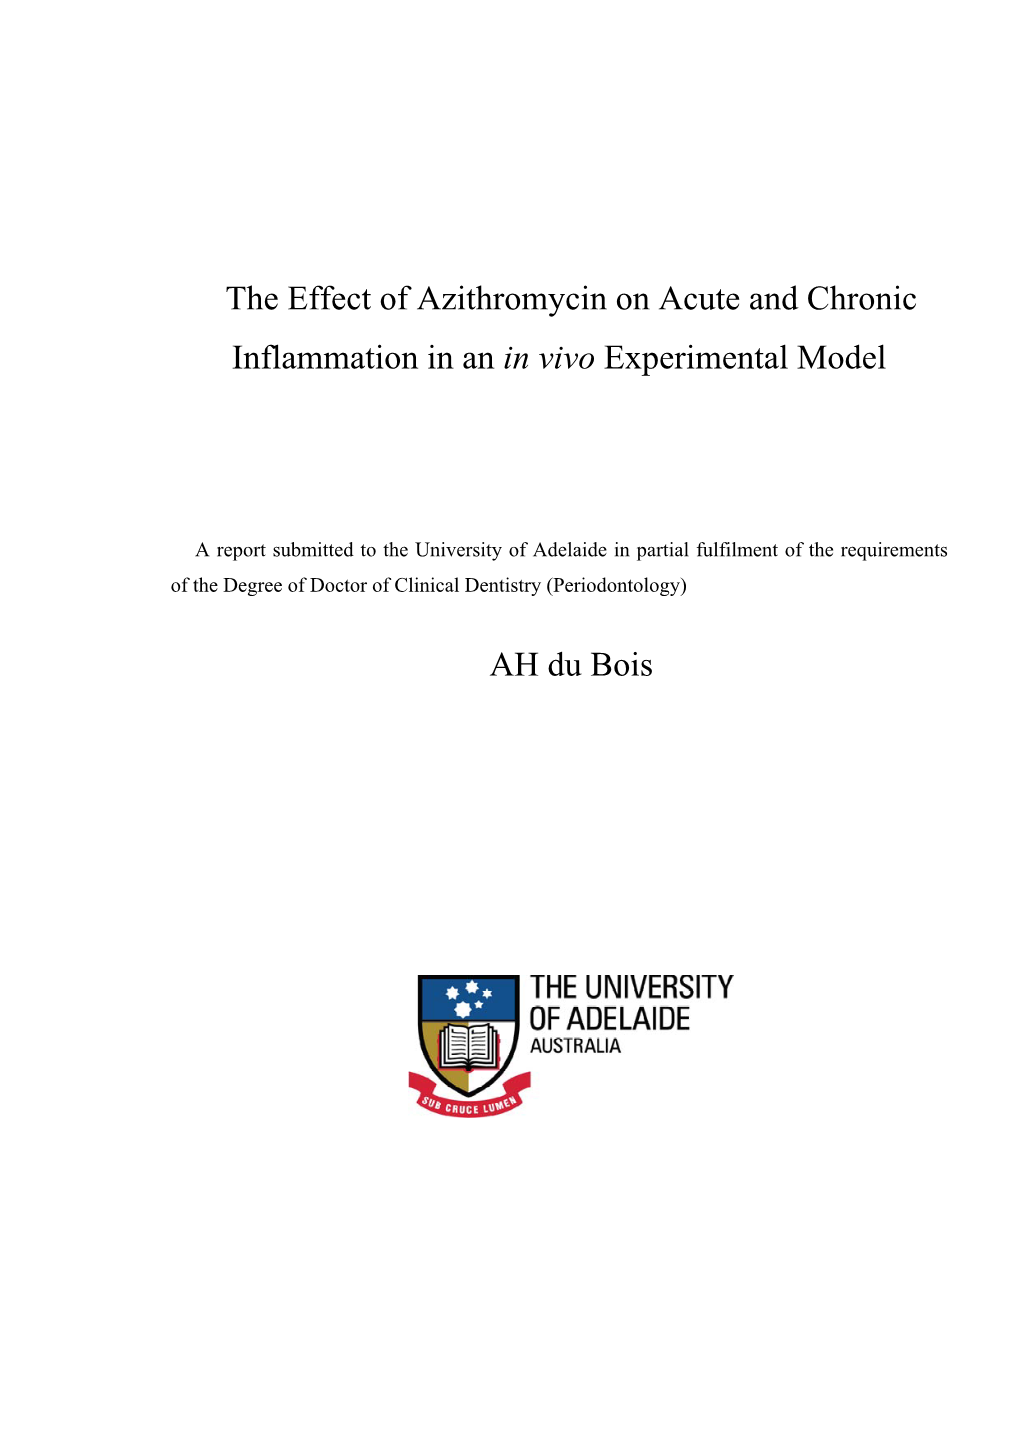 The Effect of Azithromycin on Acute and Chronic Inflammation in an in Vivo Experimental Model